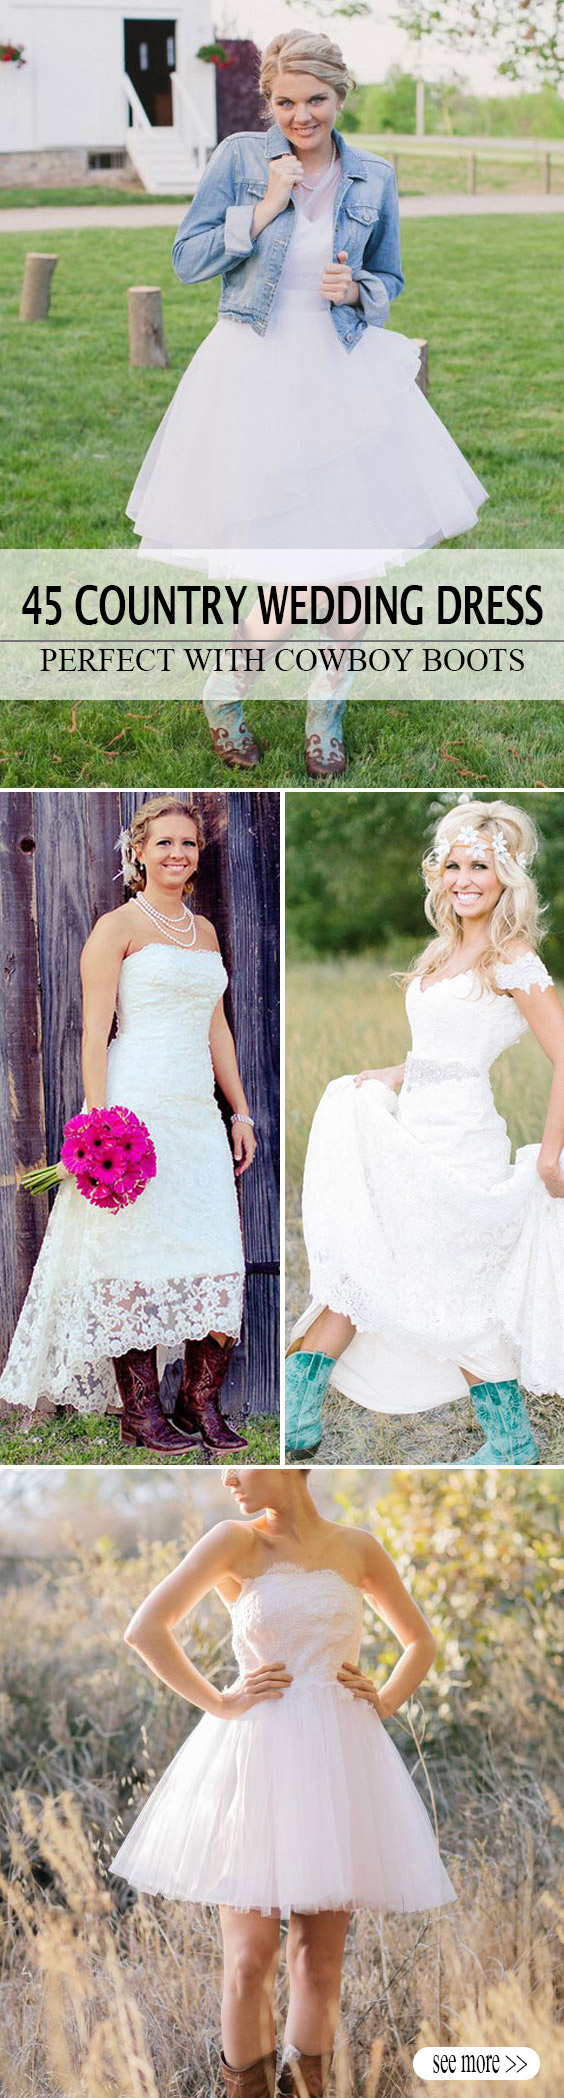 45 SHORT COUNTRY WEDDING DRESS PERFECT WITH COWBOY BOOTS